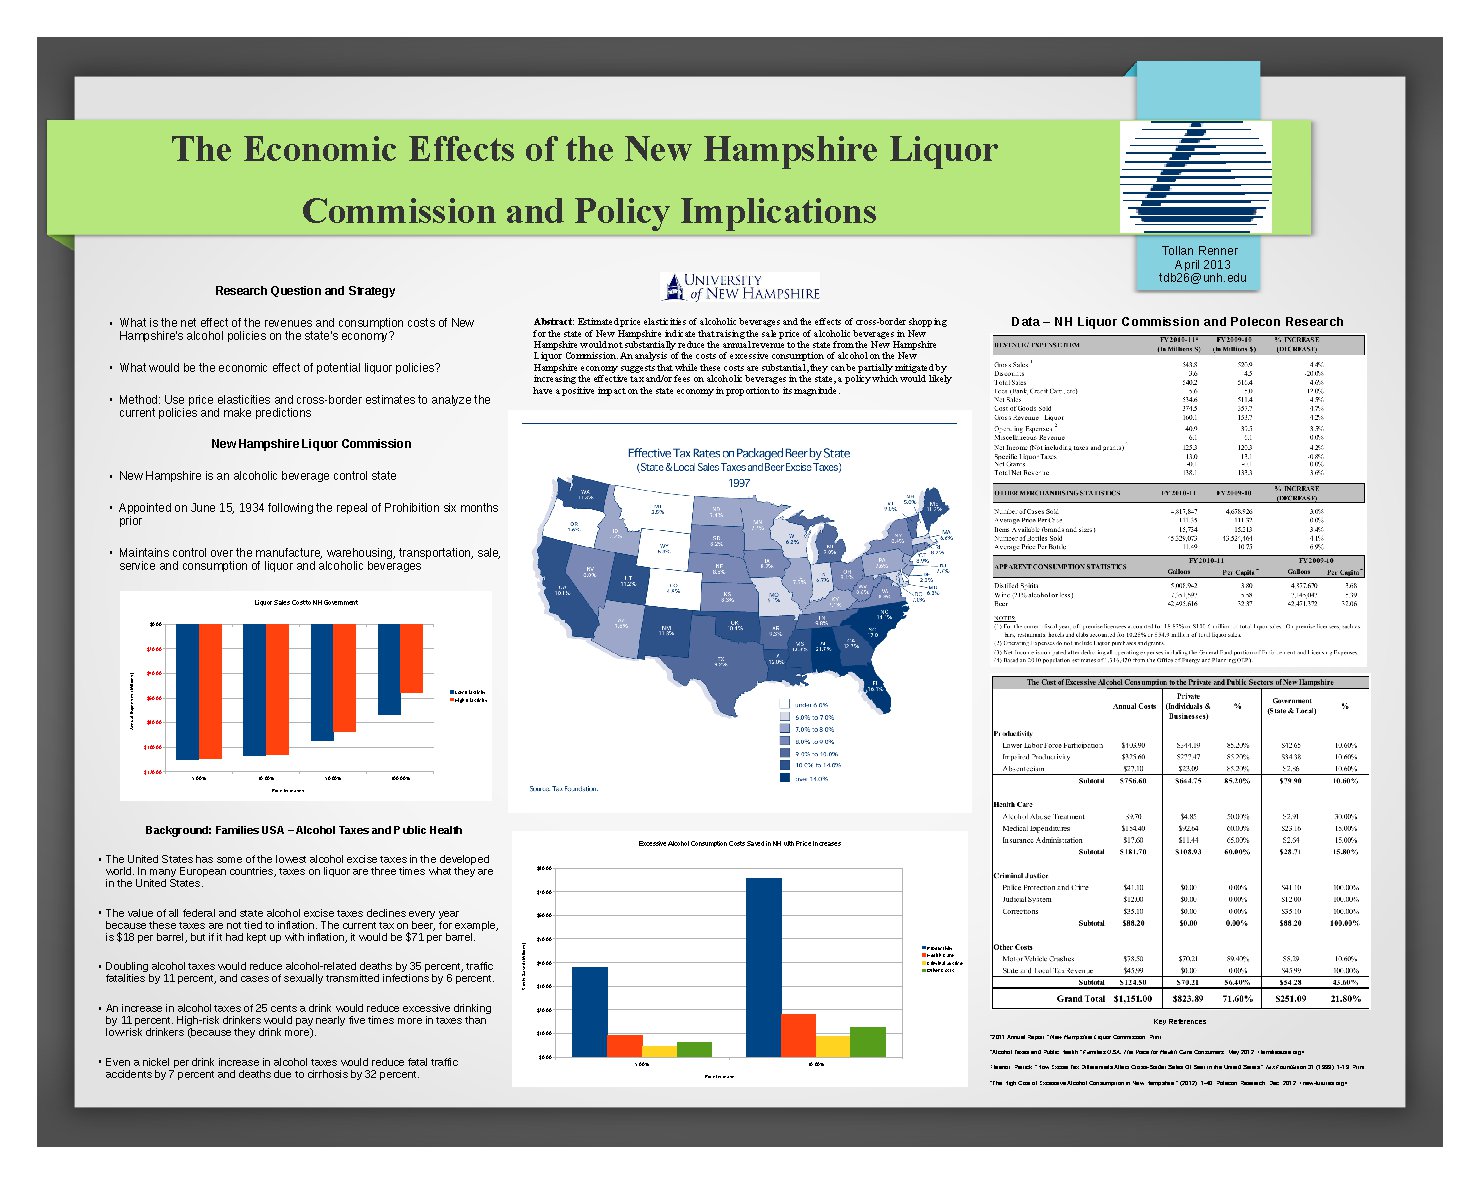 The Economic Effects Of The New Hampshire Liquor Commission And Policy Implications by tdb26